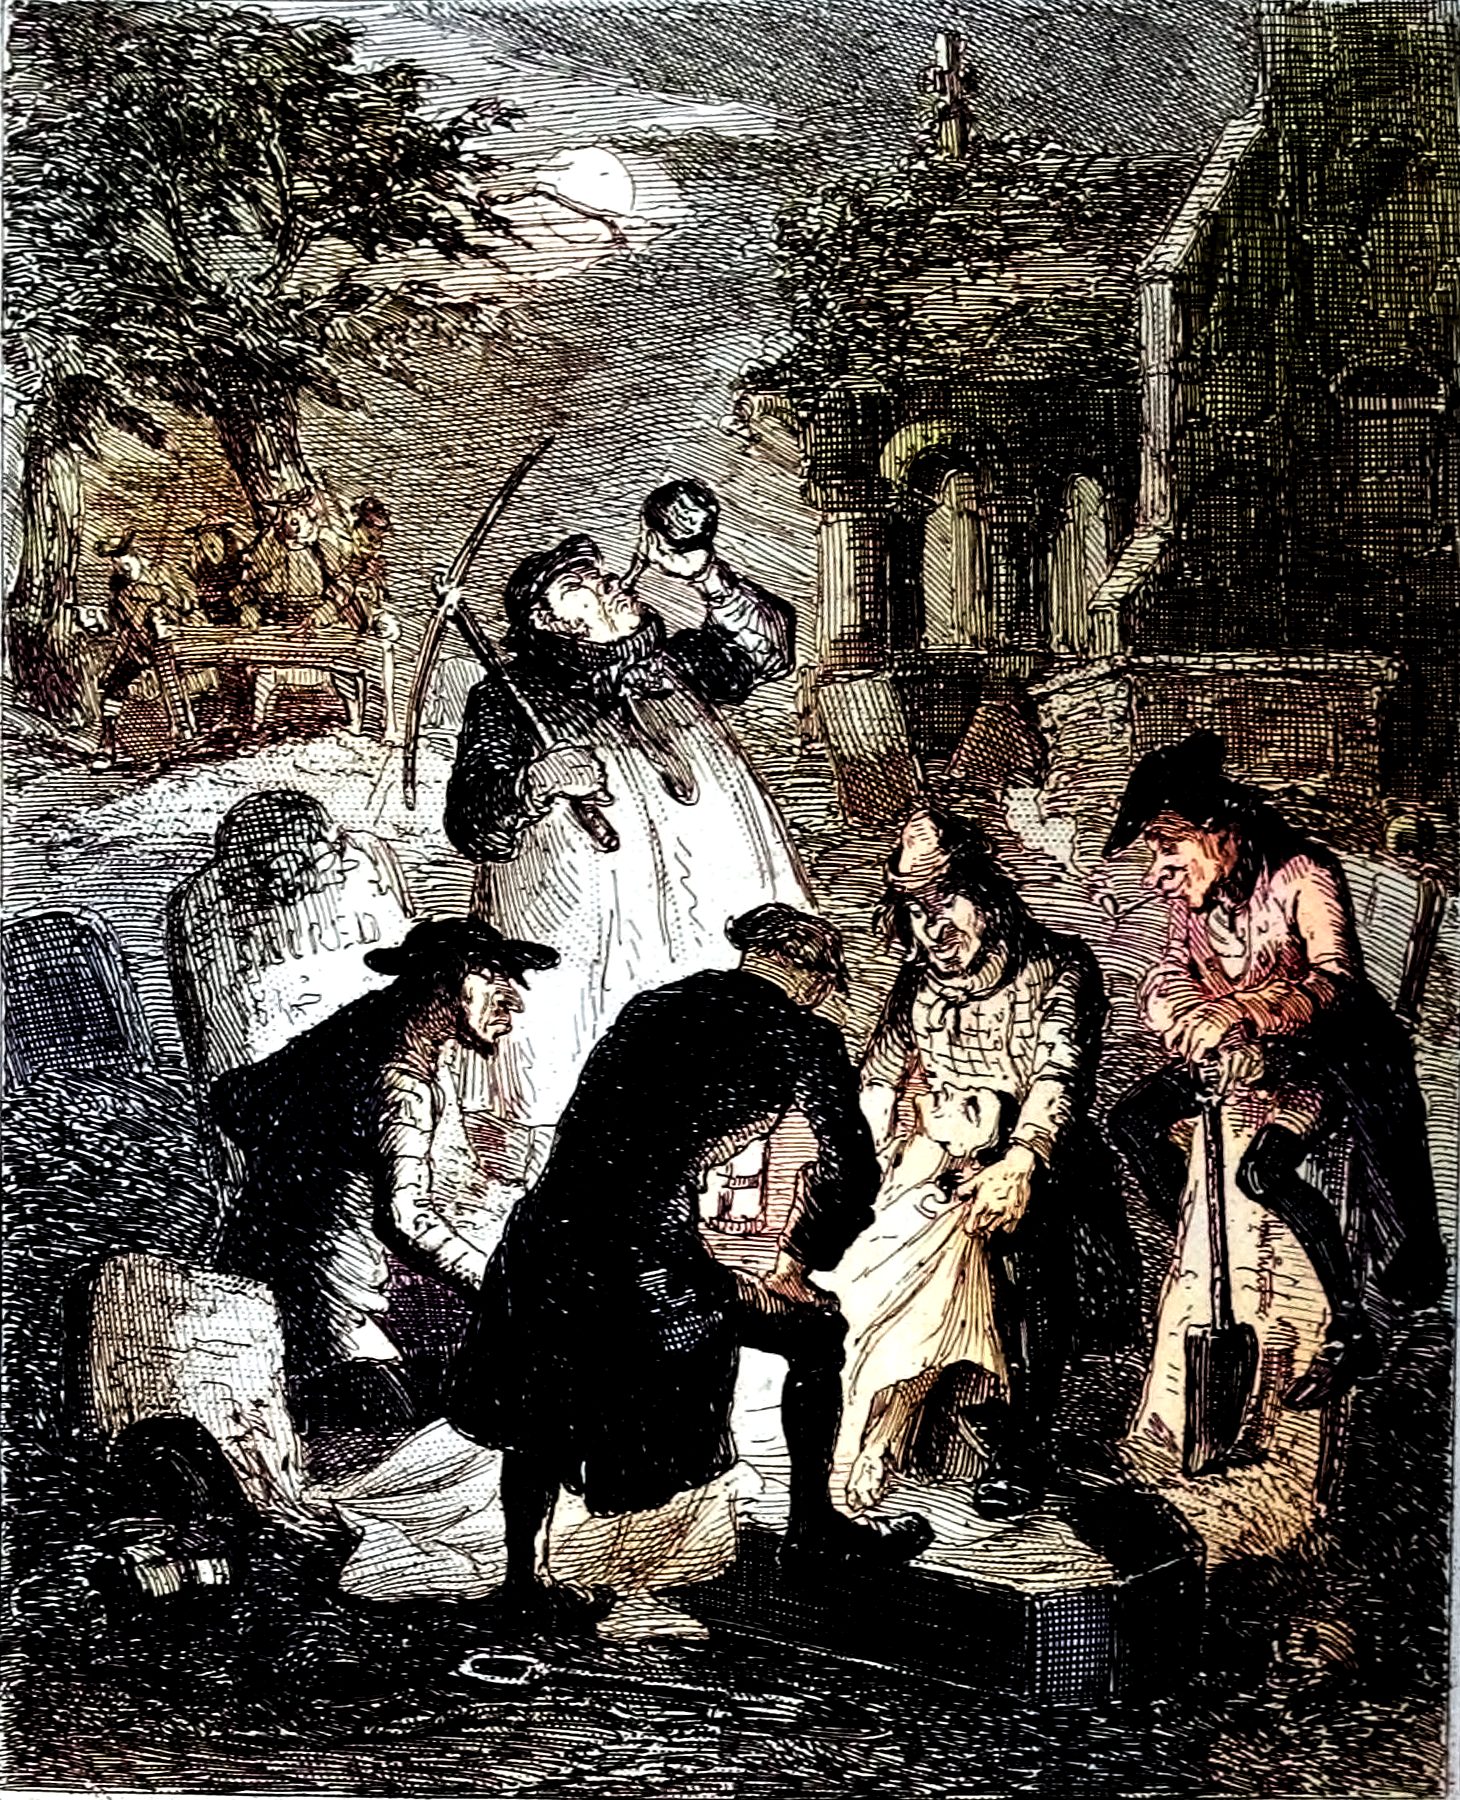 An illustration that shows a group of men gathered around a grave in a cemetery. The people are dressed in clothing from the 1800s. Some of the men are holding digging tools. They appear to be digging up a corpse. One man is kneeling next to the tombstone, while the others stand around him. The scene is set at night, with the moon and stars visible in the sky.